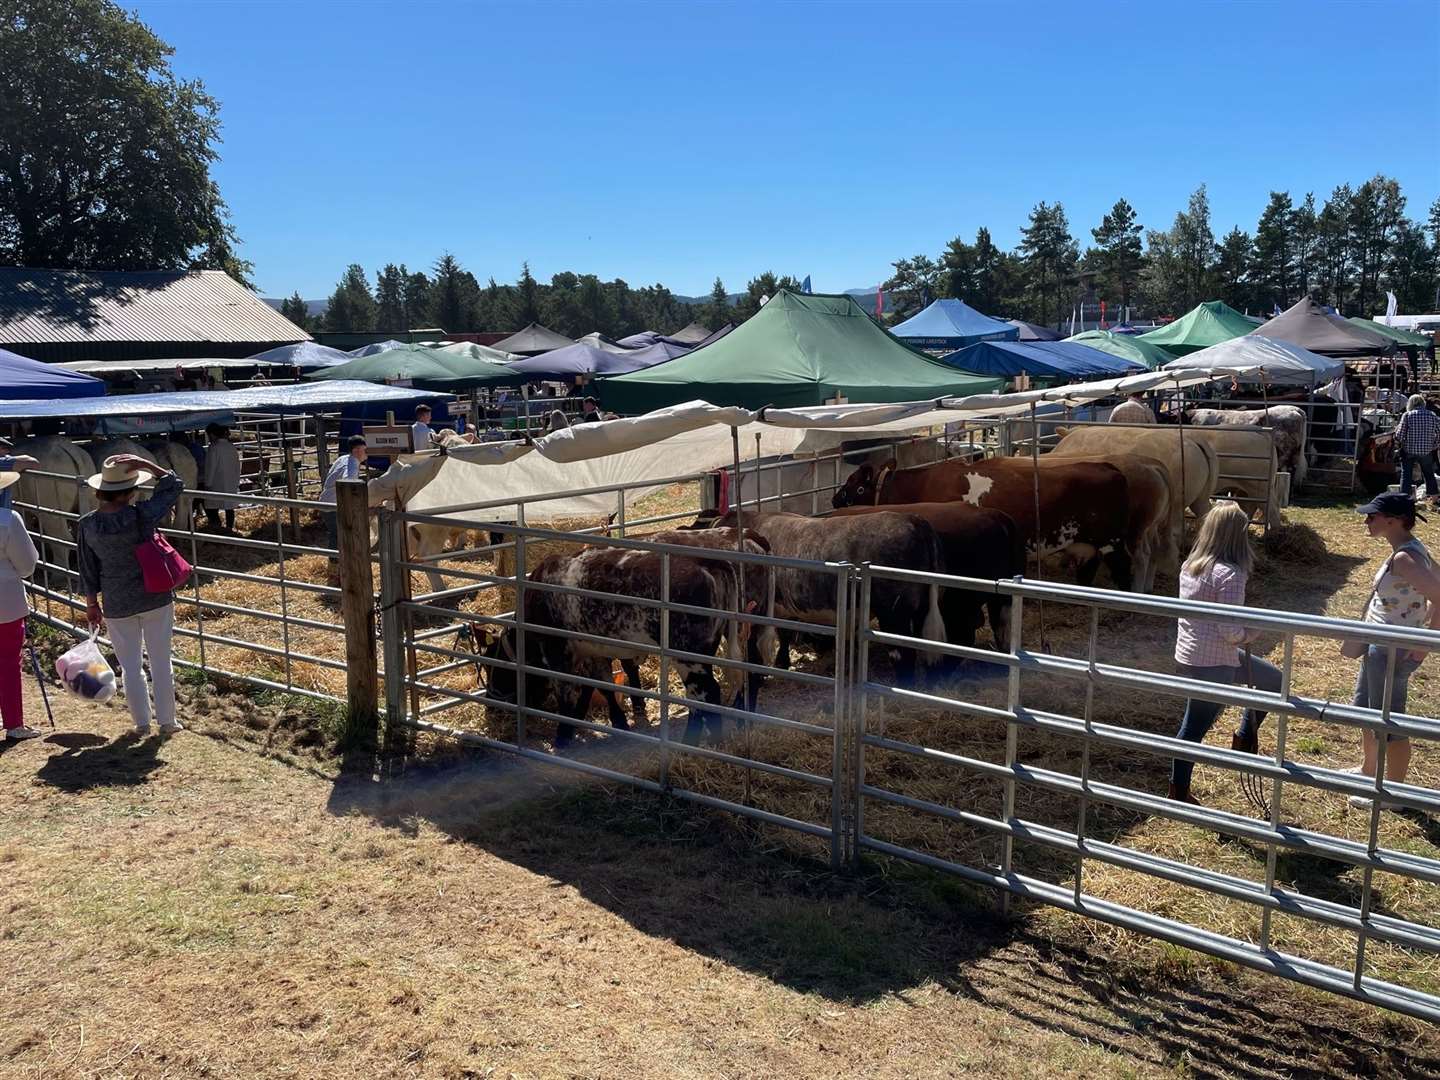 It was another successful agricultural show held in excellent weather, but there were problems at the entrance gates due to problems with the contactless payment system and a lack of cash at the other ATMs in Grantown.